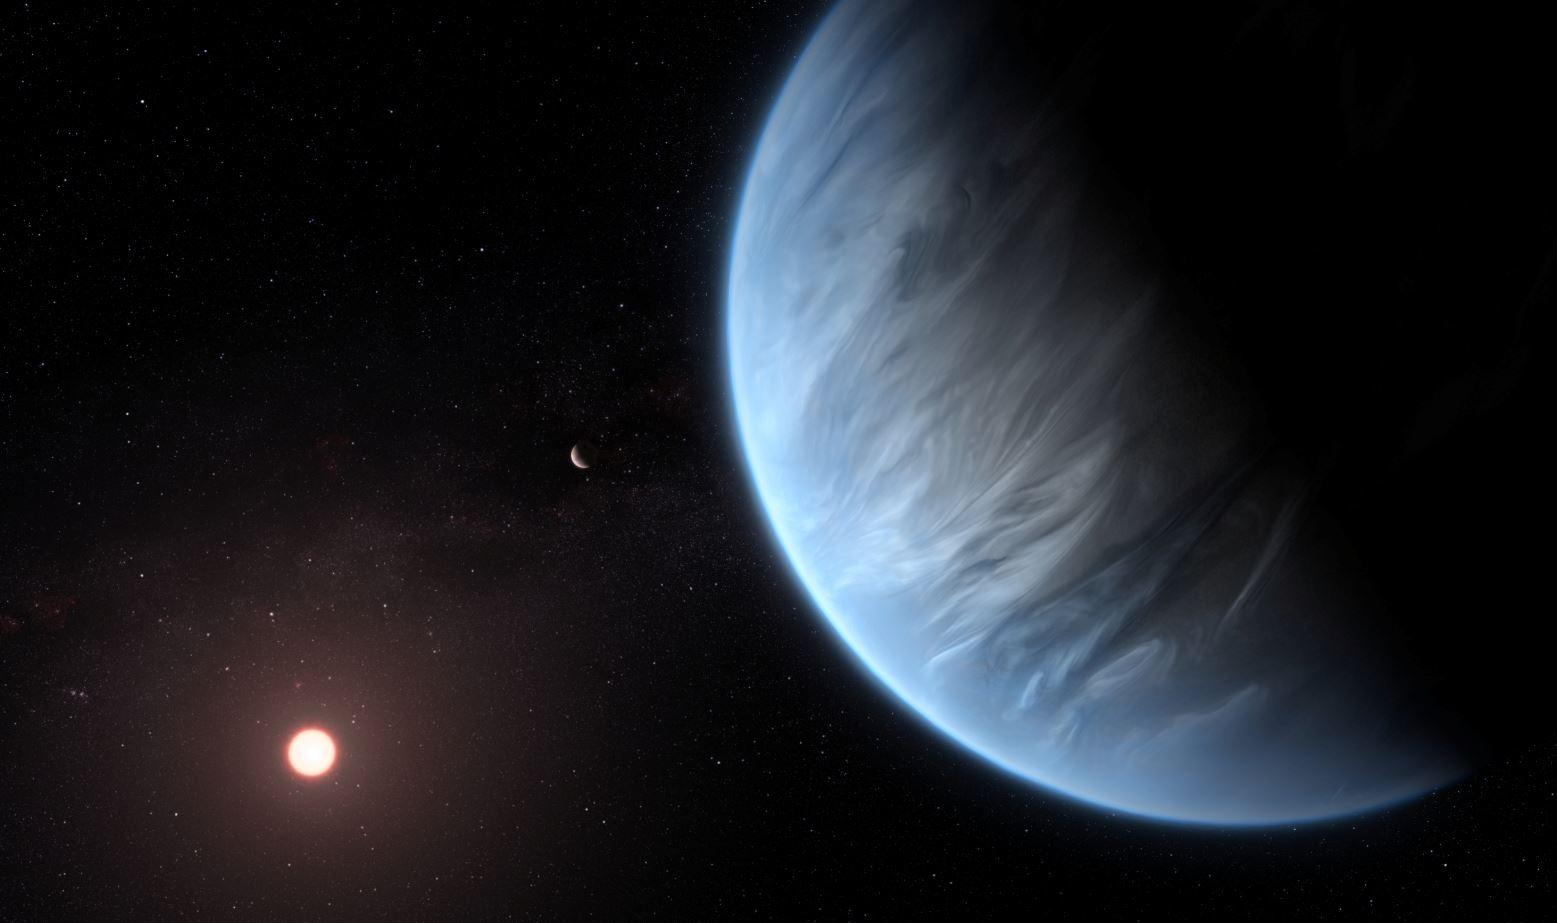 An artist's impression released by NASA on September 11, 2019 shows the planet K2-18b, its host star and an accompanying planet. Courtesy ESA/Hubble/M. Kornmesser/NASA Handout via REUTERS